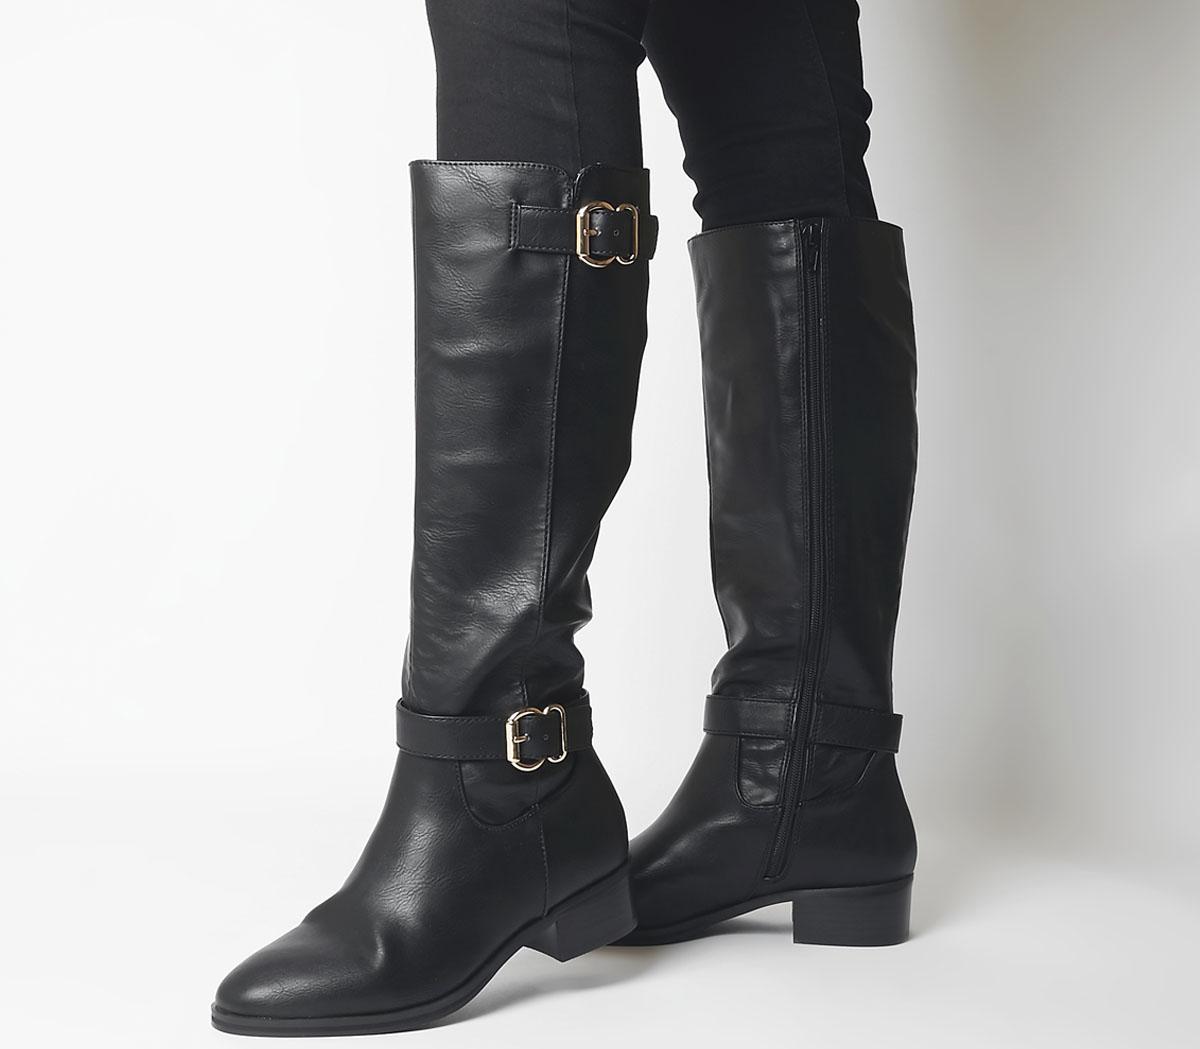 riding boots with buckles